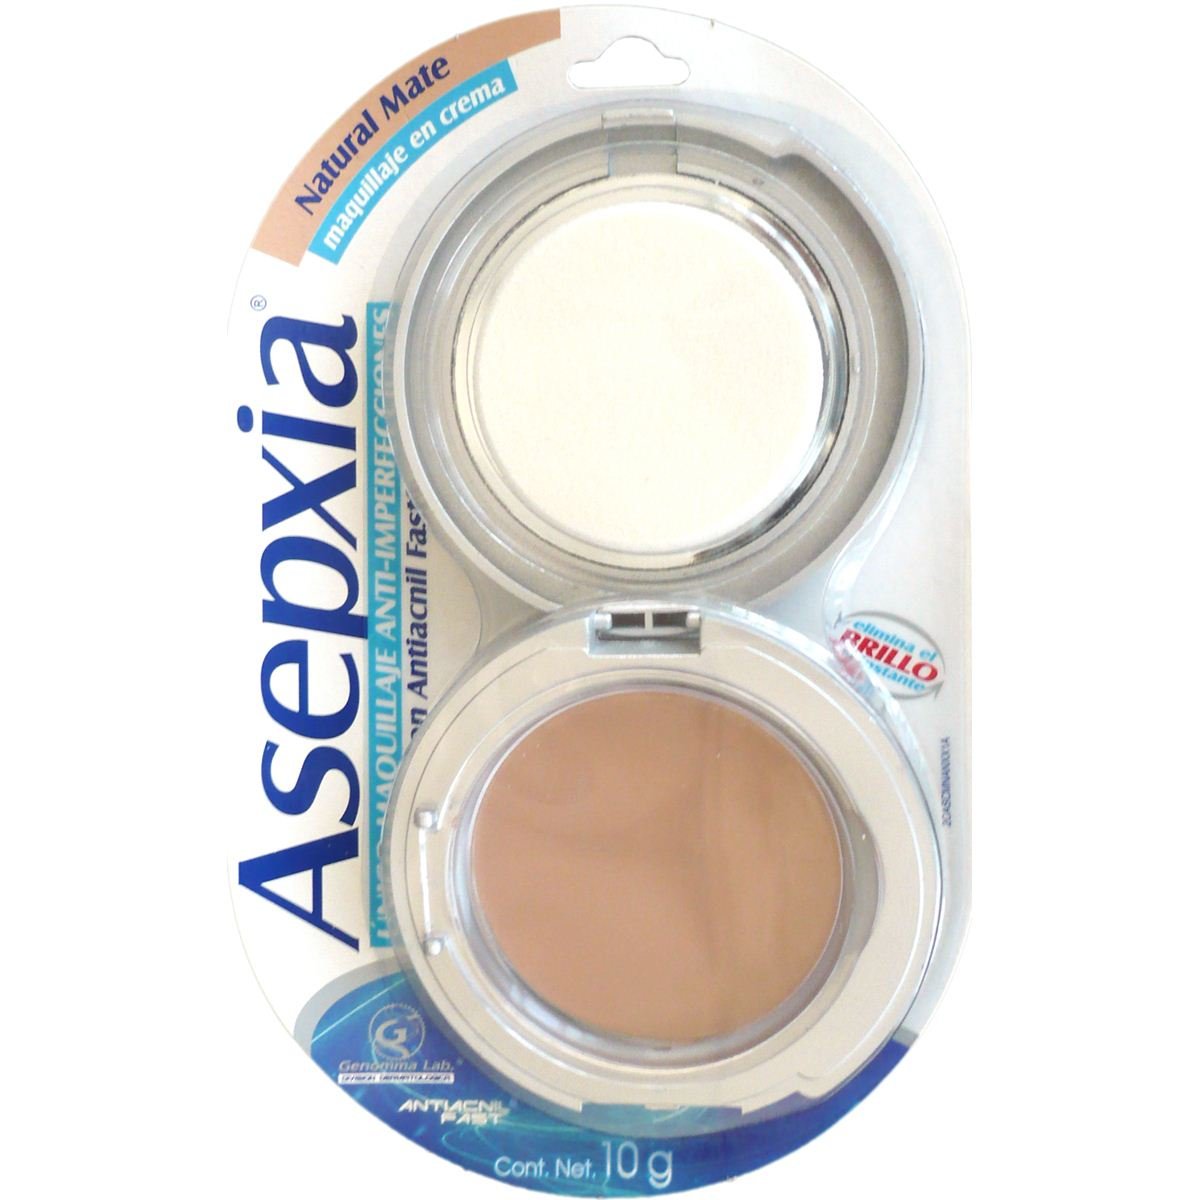 Asepxia Maquillaje Crema Natural